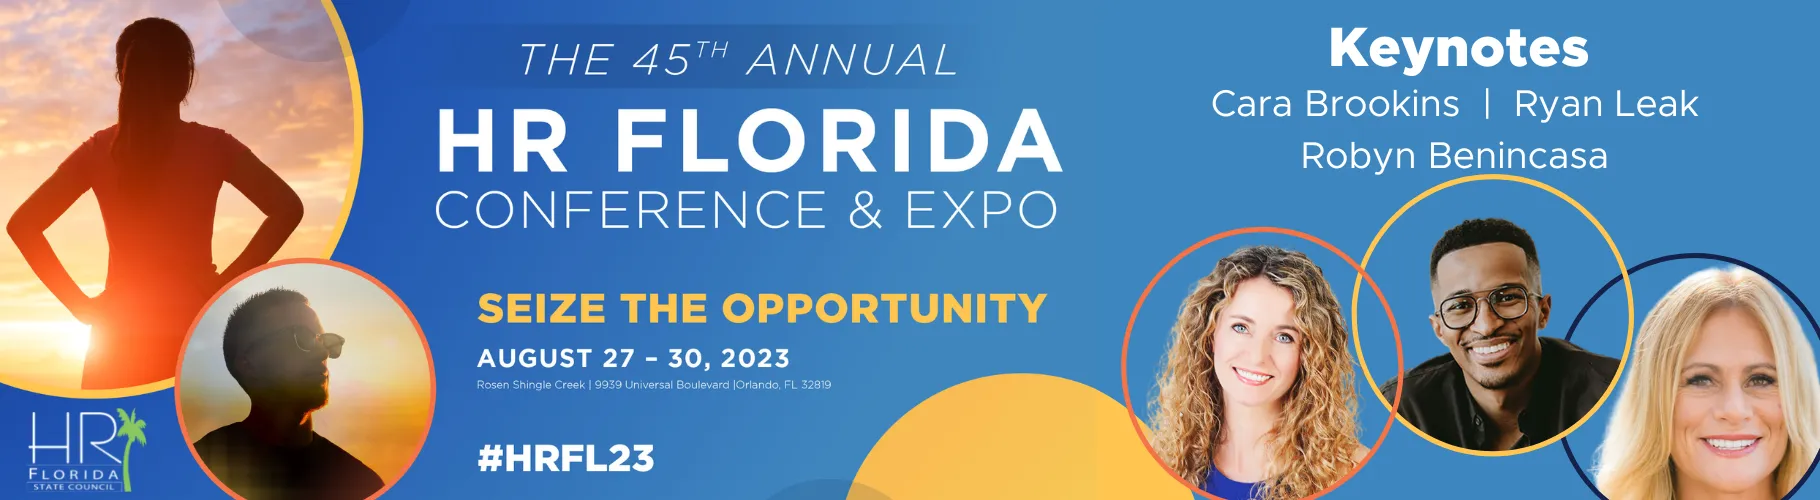 HR Florida Conference & Expo